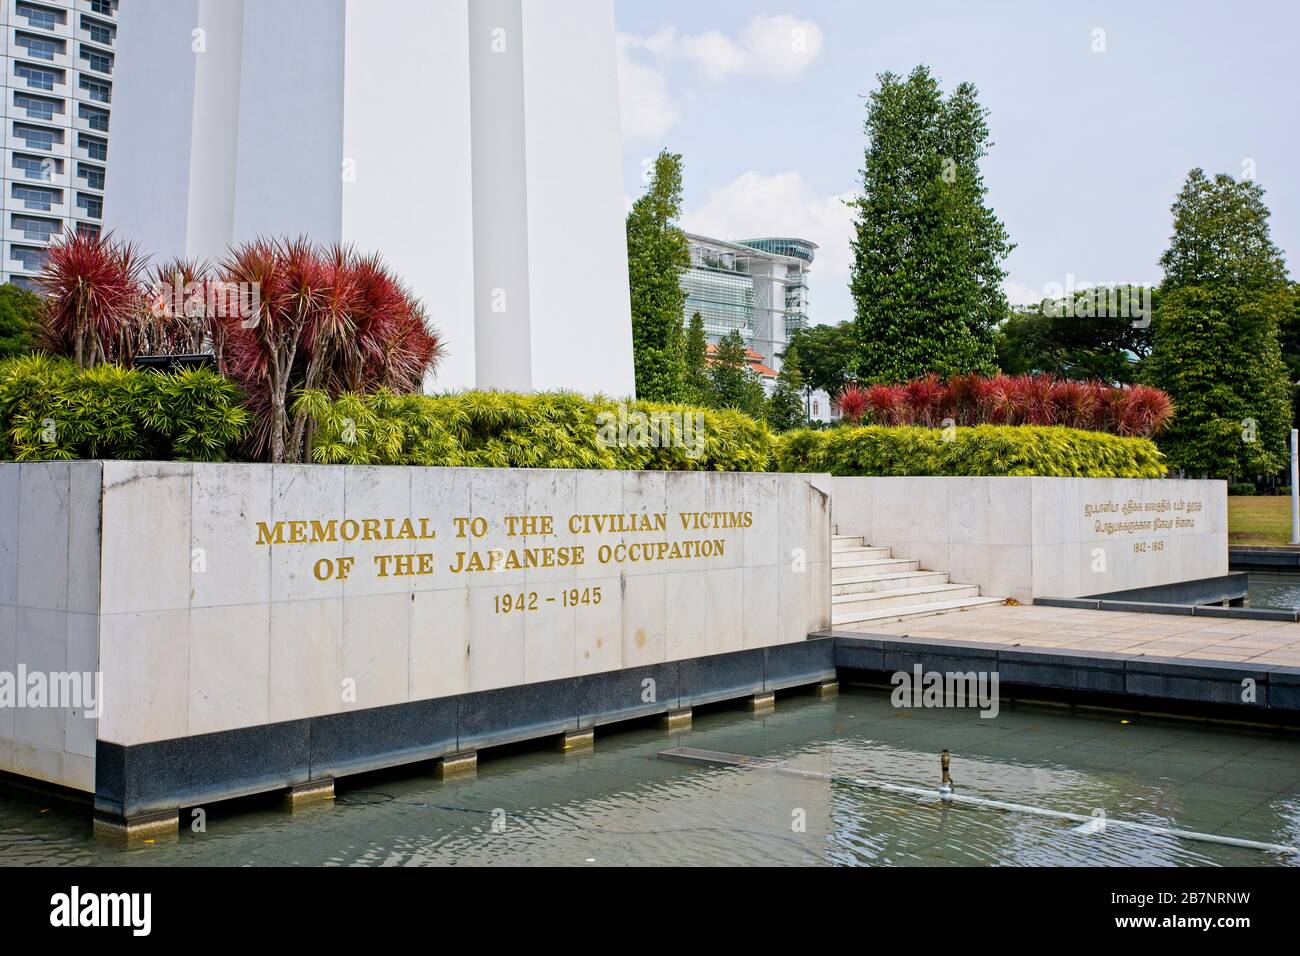 War memorial in Singapore commemorating the civilian victims of the Japanese occupation during World War 2 Stock Photo